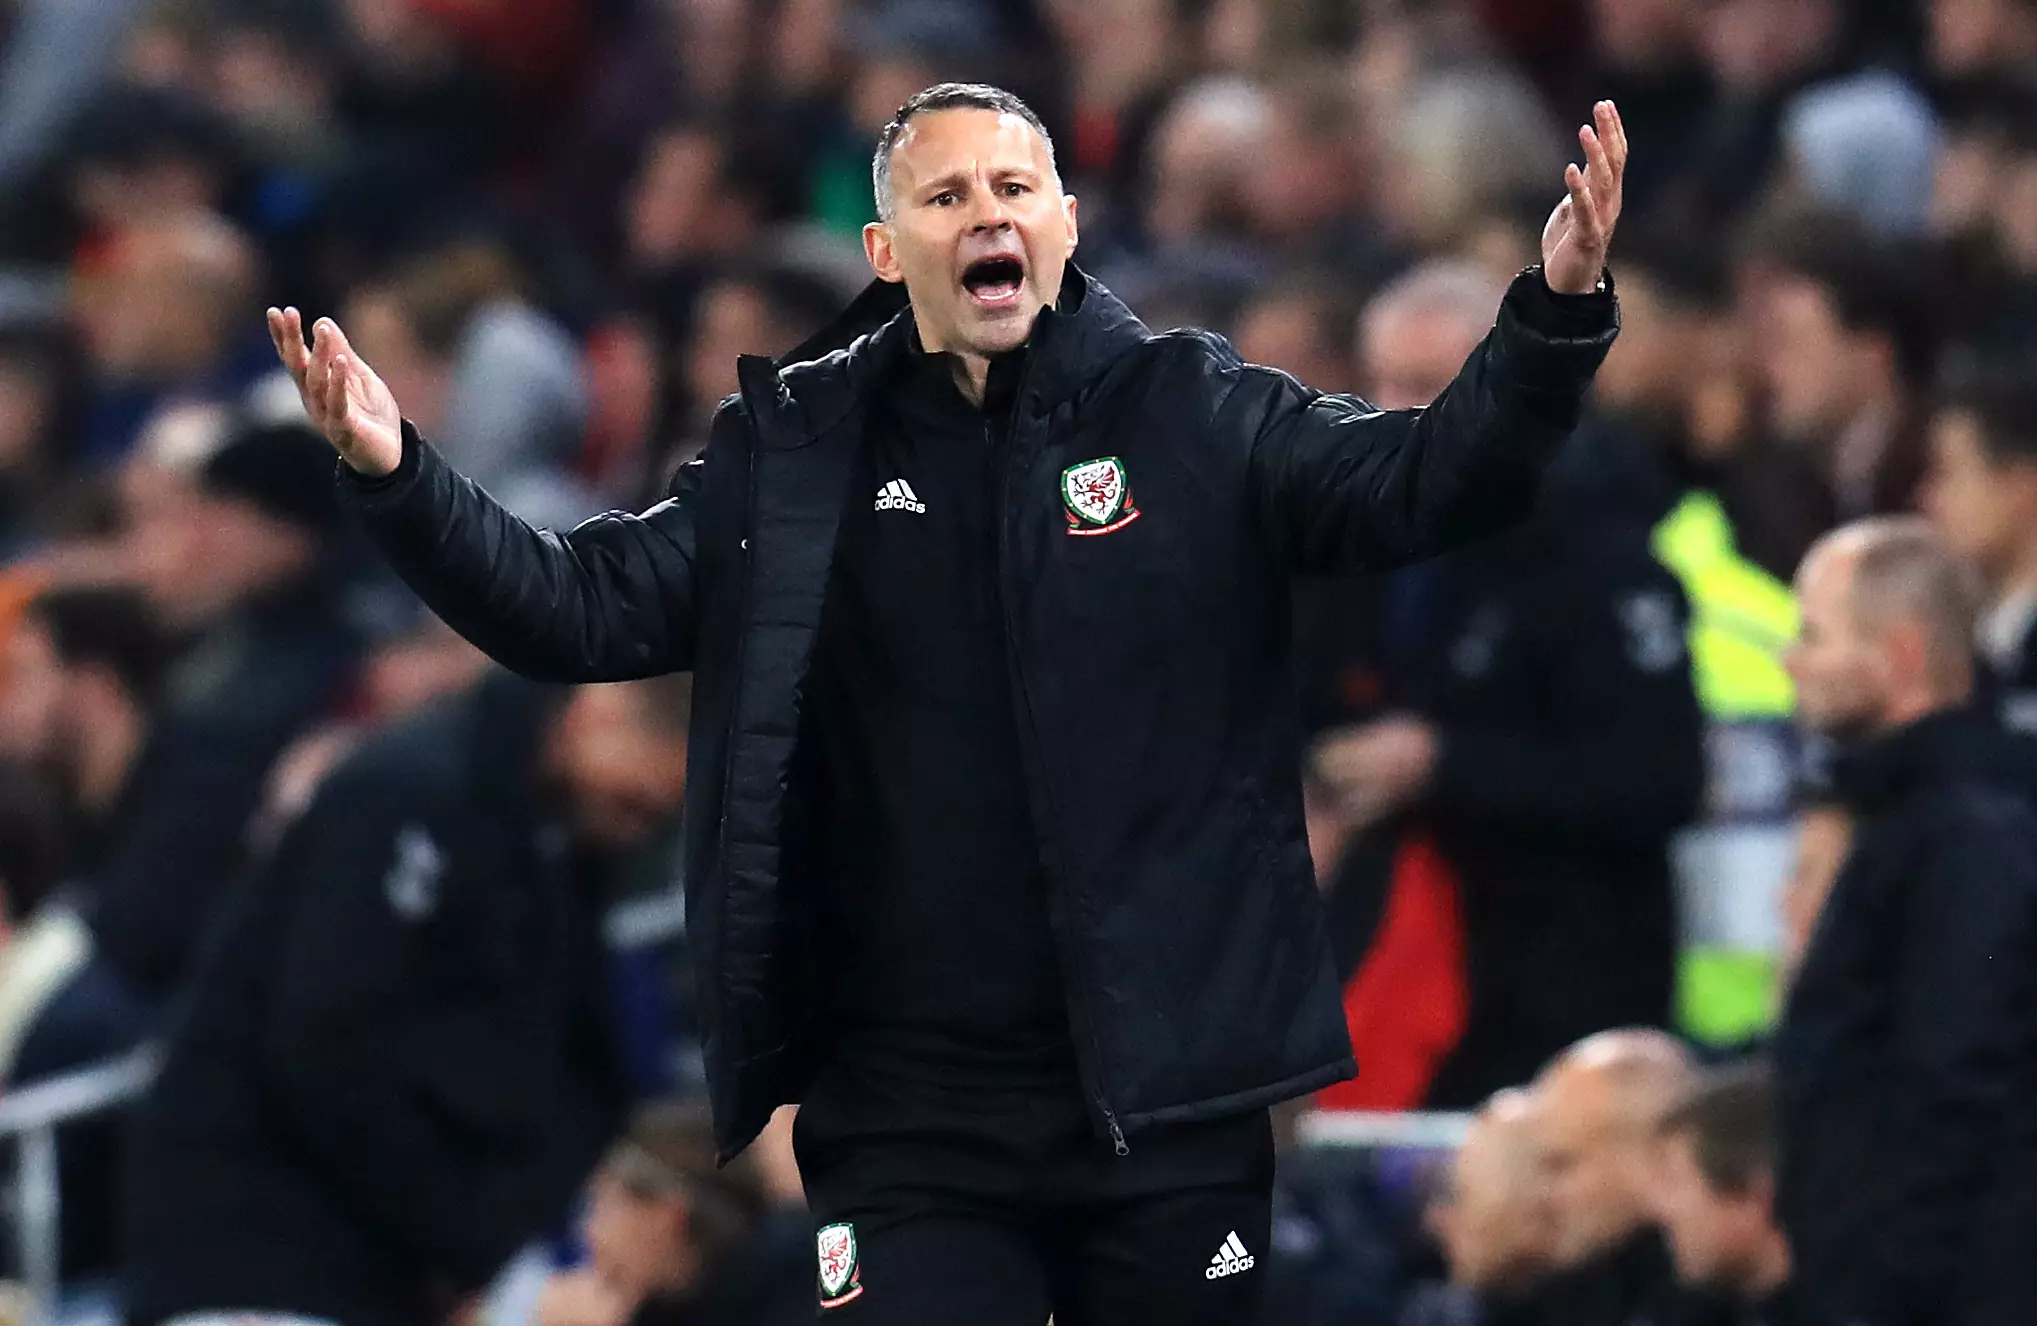 Giggs is now in charge of Wales. Image: PA Images